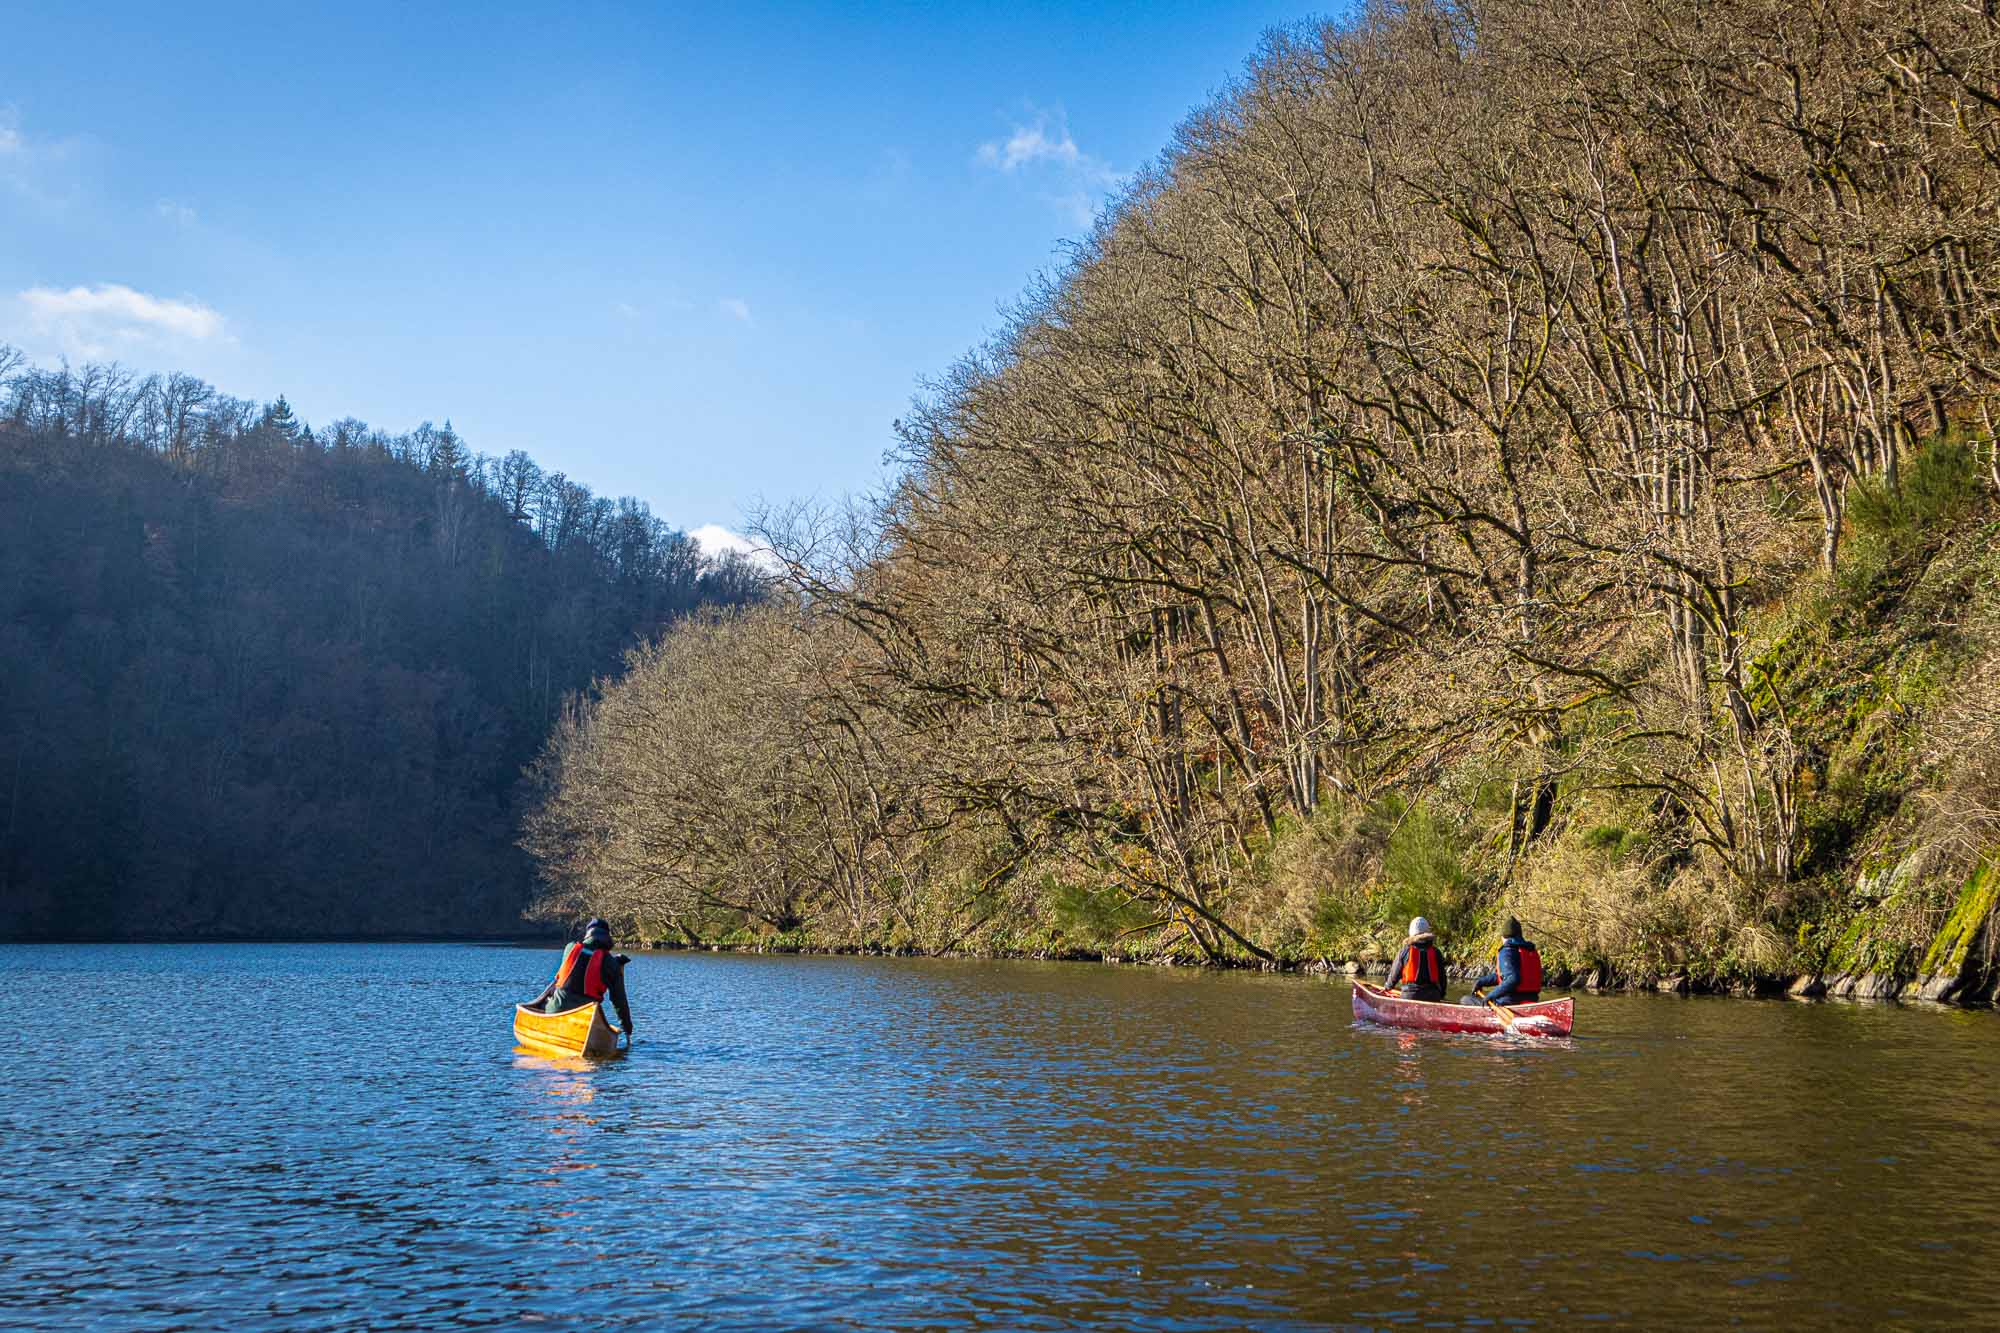 Mastering the art of canoeing on the Lac de Nisramont